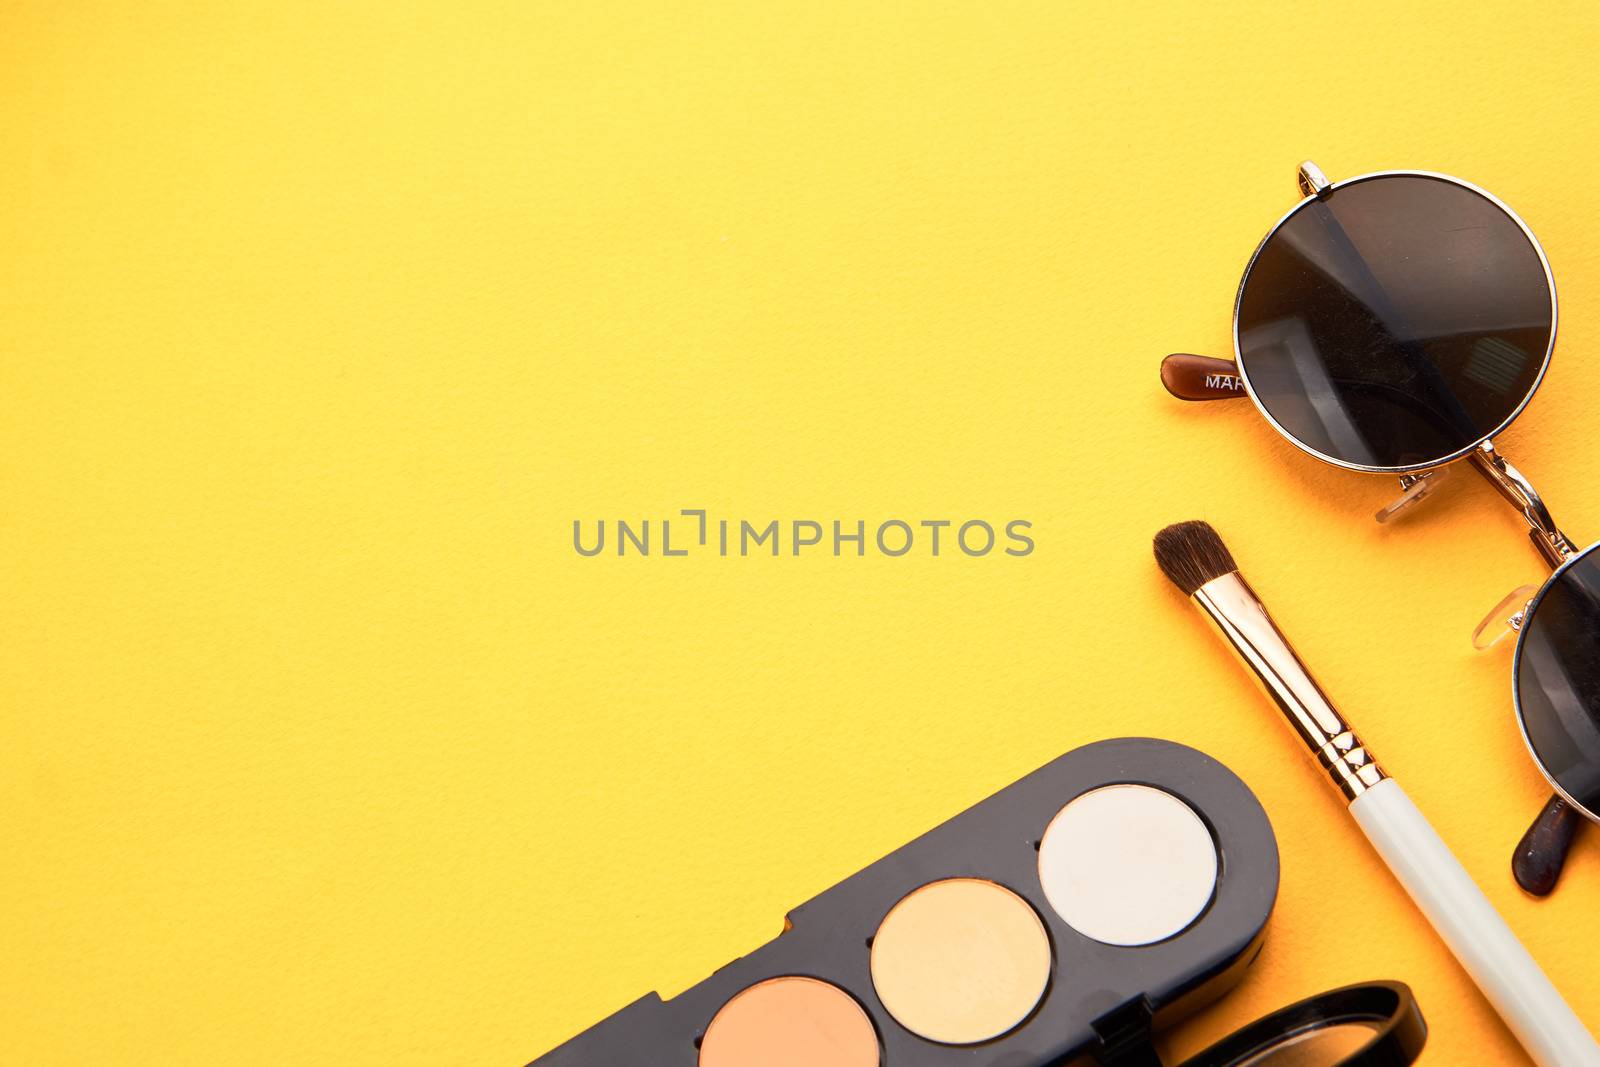 Professional eyeshadows and makeup brushes on a yellow background make-up decoration. High quality photo